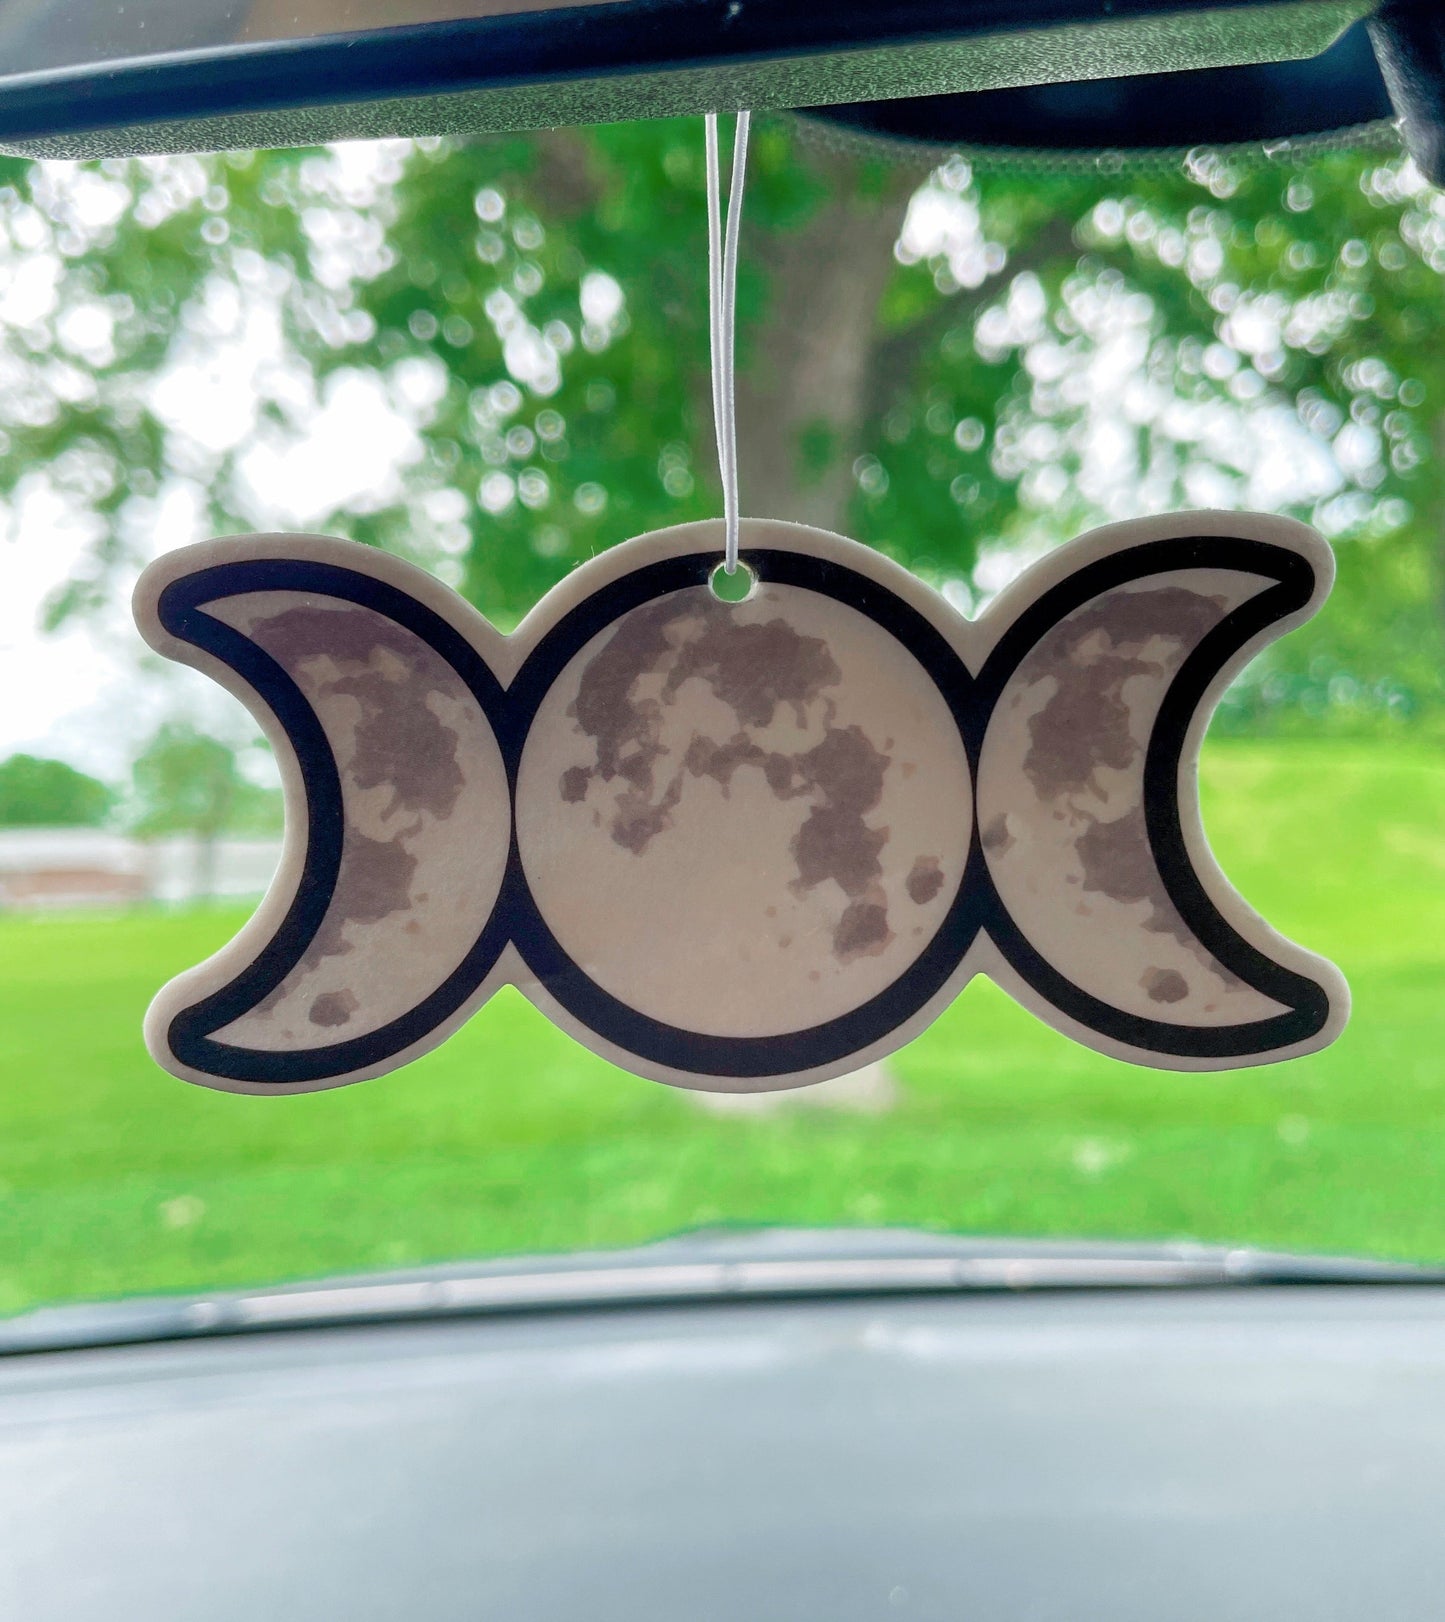 Pictured is an air freshener in the shape of a triple moon symbol